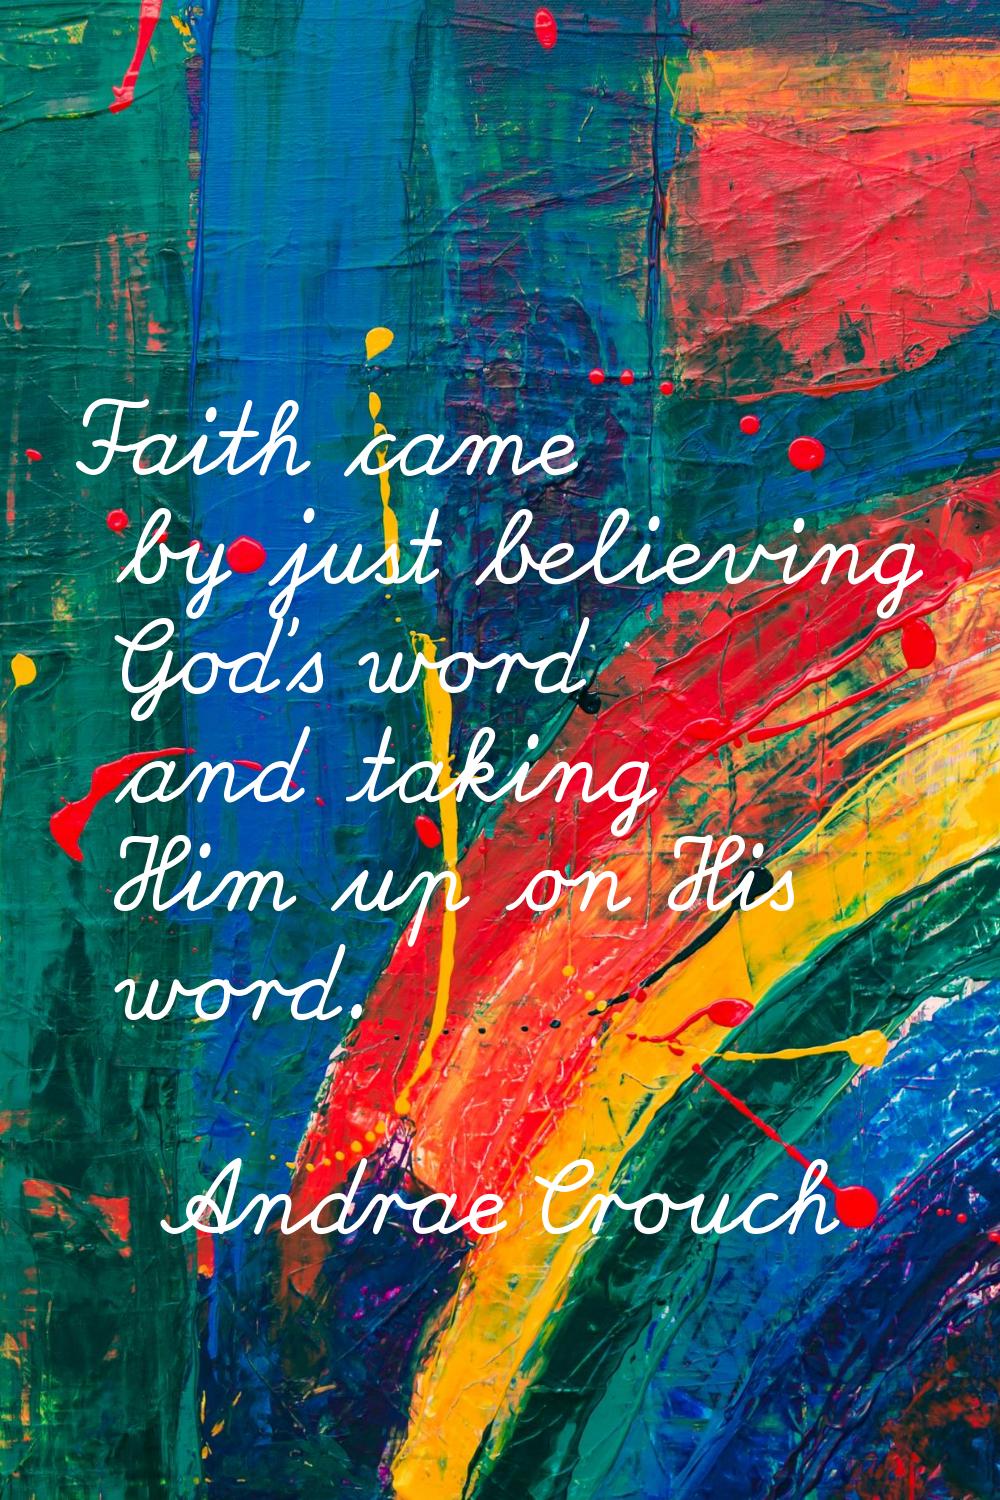 Faith came by just believing God's word and taking Him up on His word.